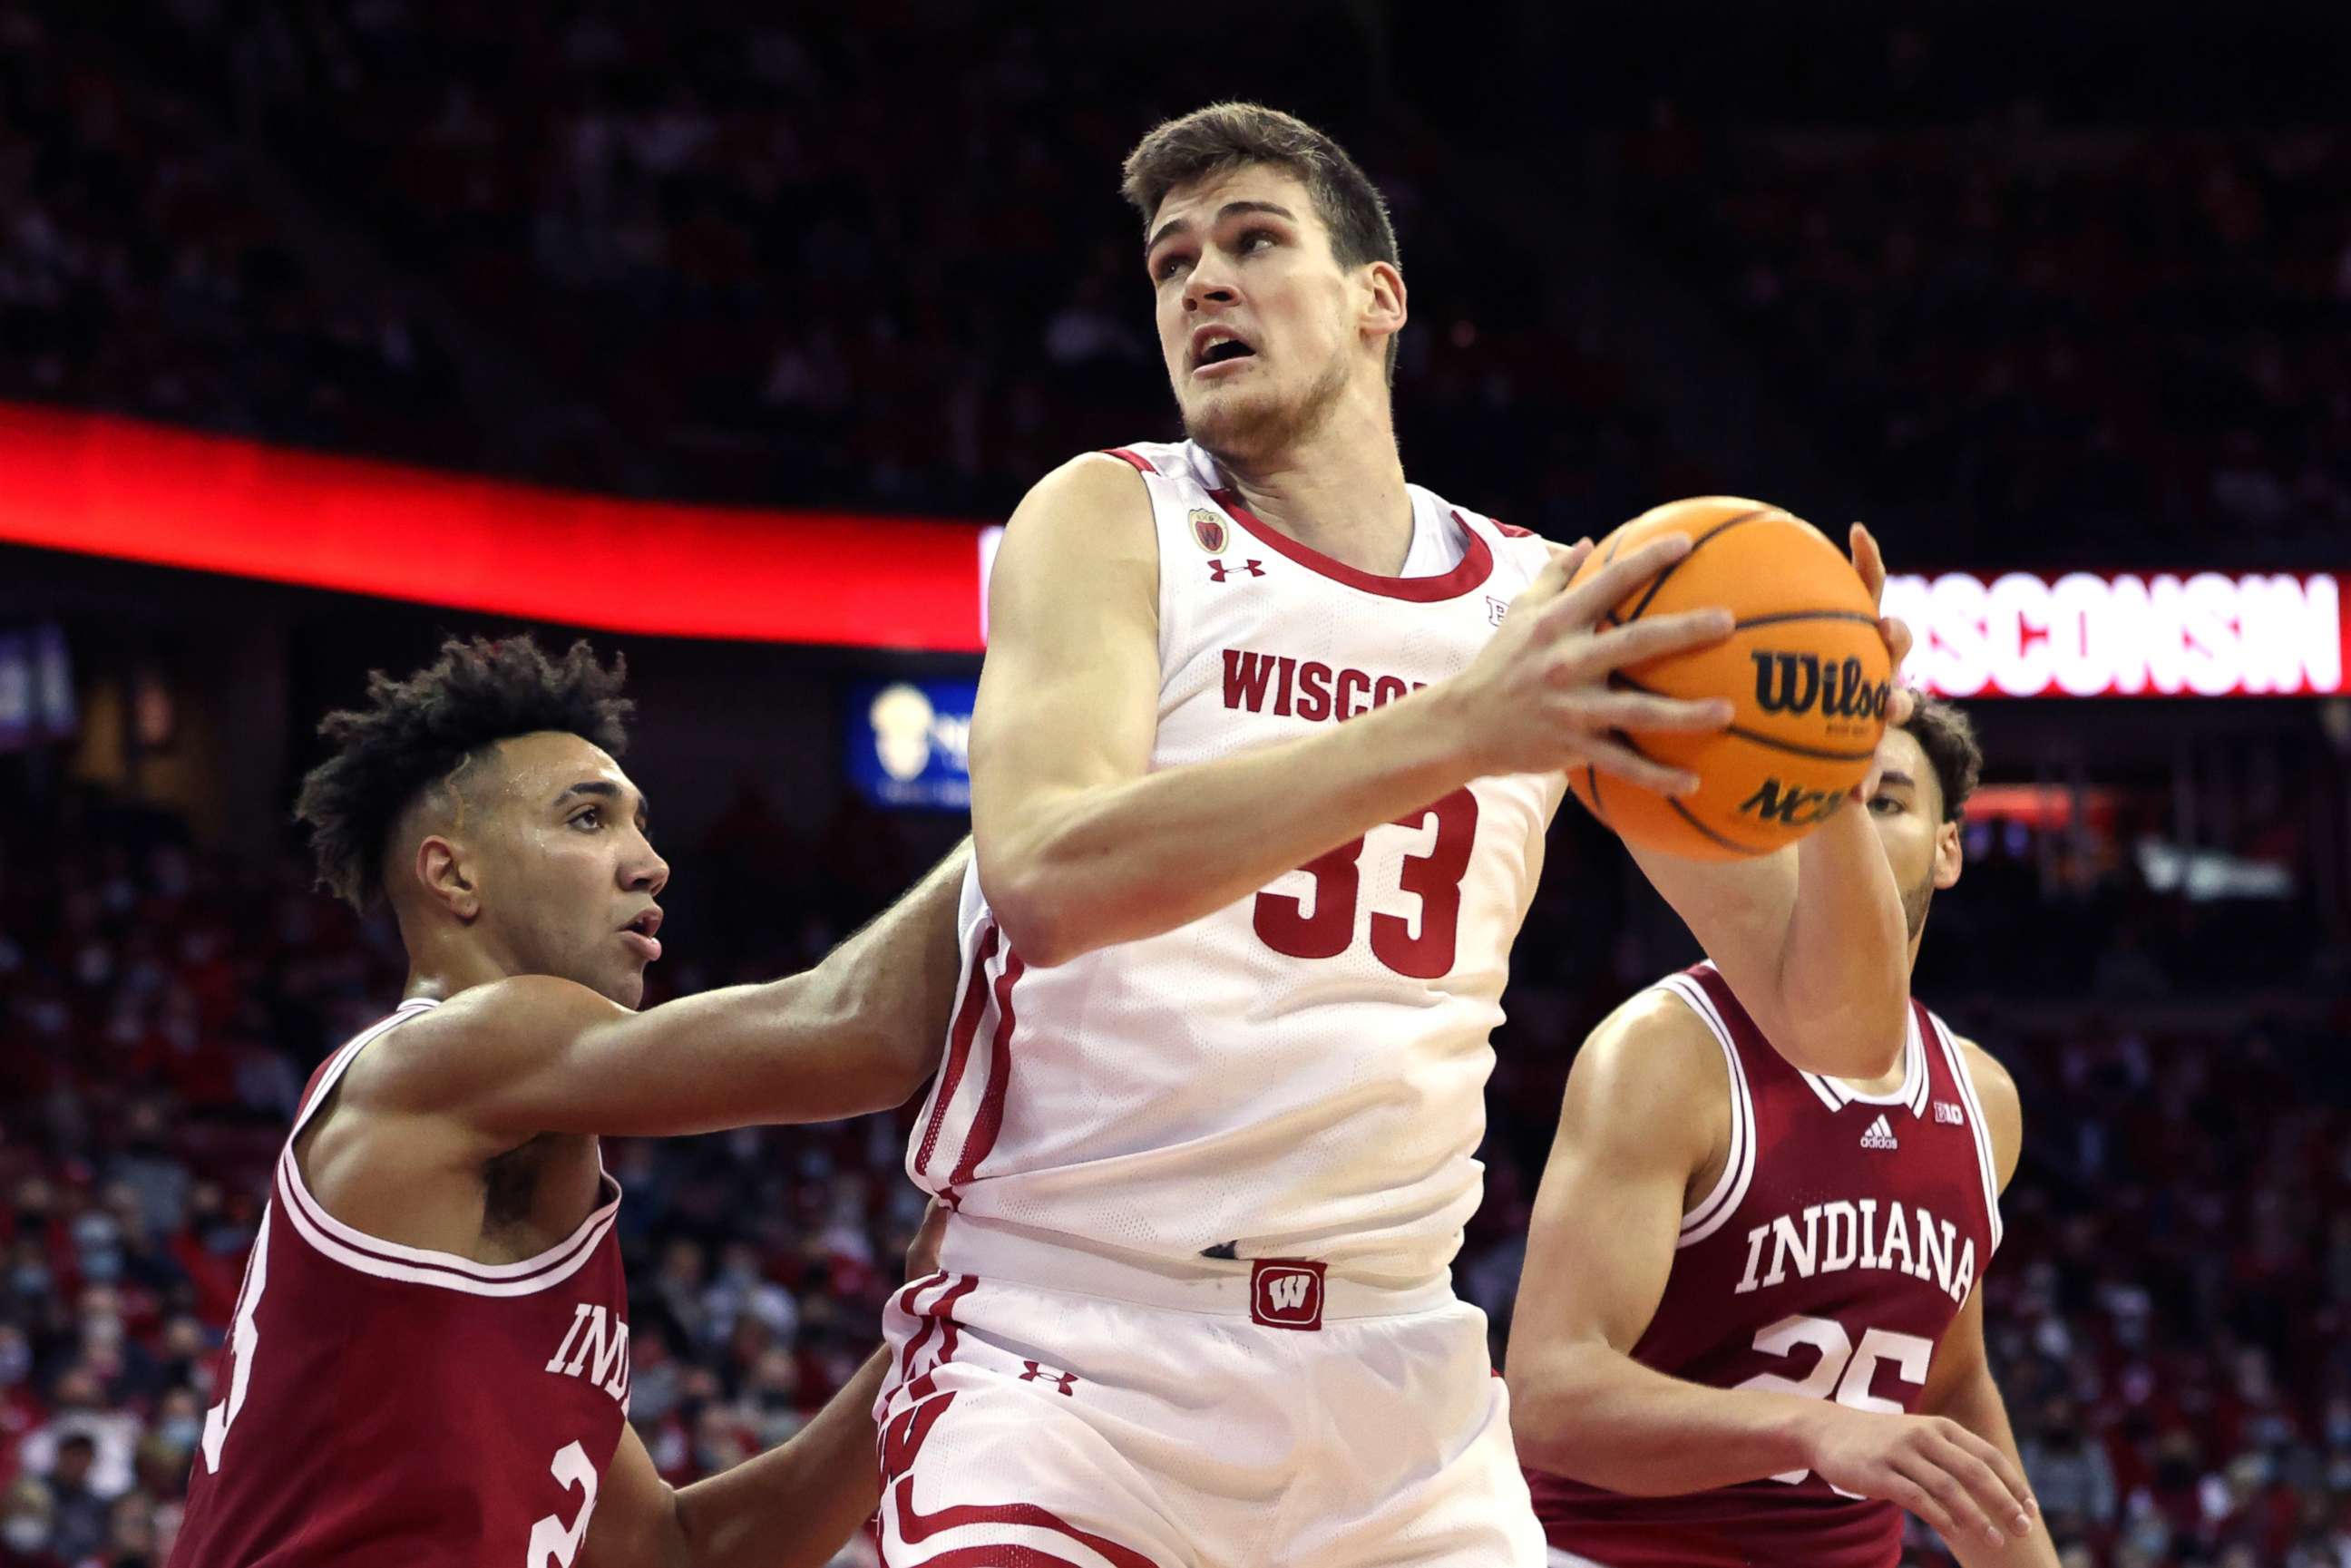 PHOTO: Wisconsin Badgers center Chris Vogt posts up during the NCAA Basketball game between the Indiana Hoosiers and the Wisconsin Badgers at the Kohl Center in Madison, Wis., Dec. 8, 2021.